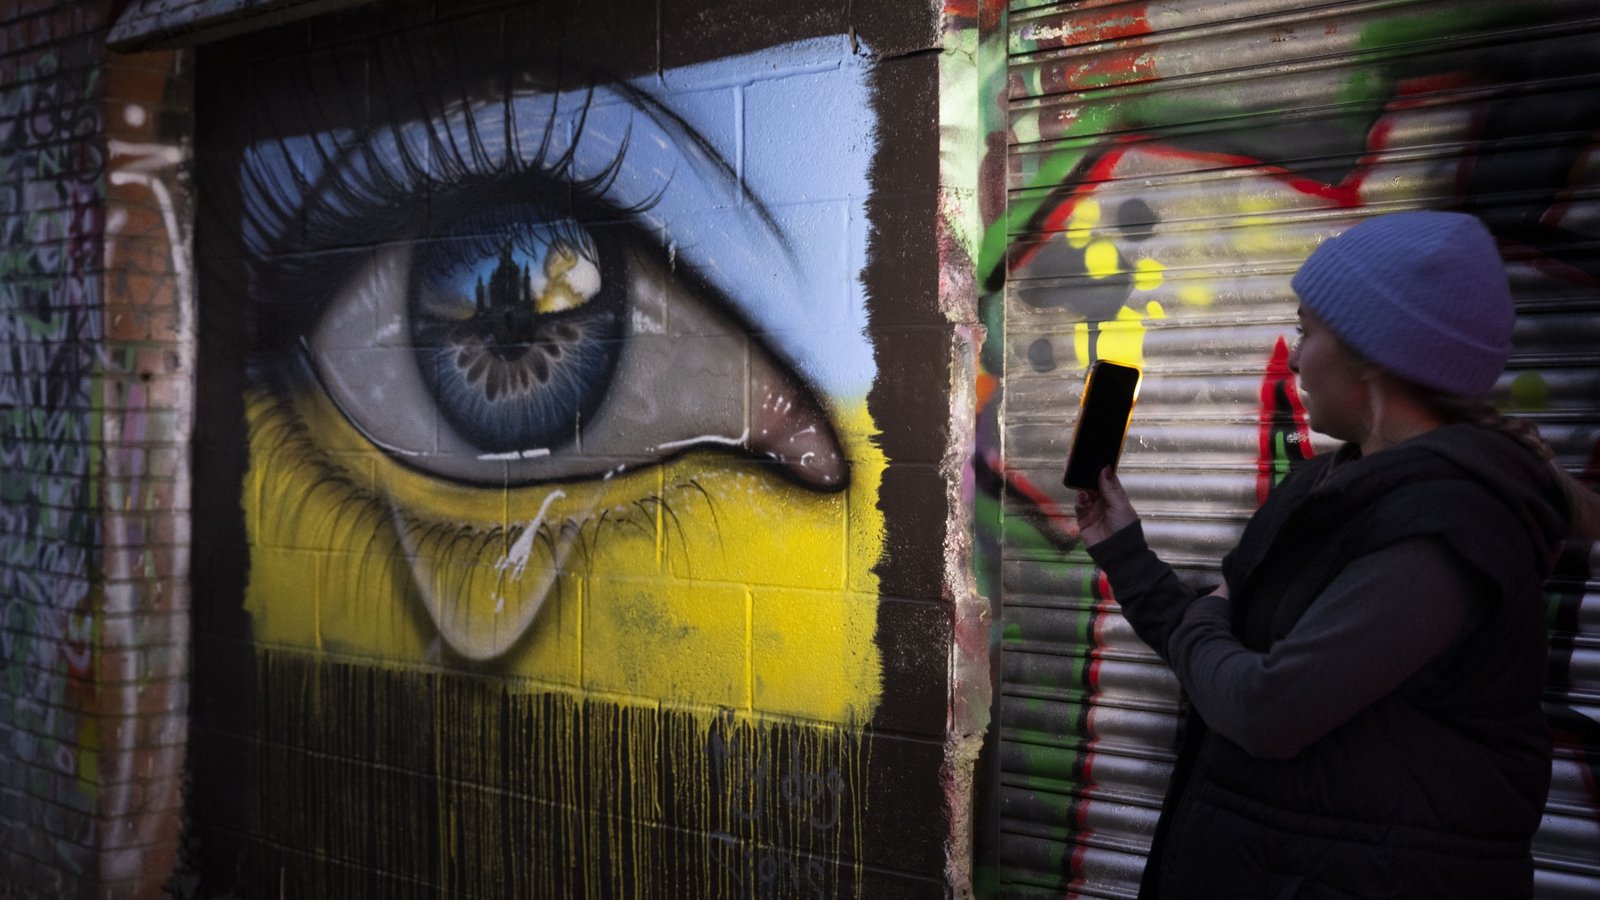 Image - Graffiti artwork in Wales shows a weeping eye in the colours of a Ukrainian flag